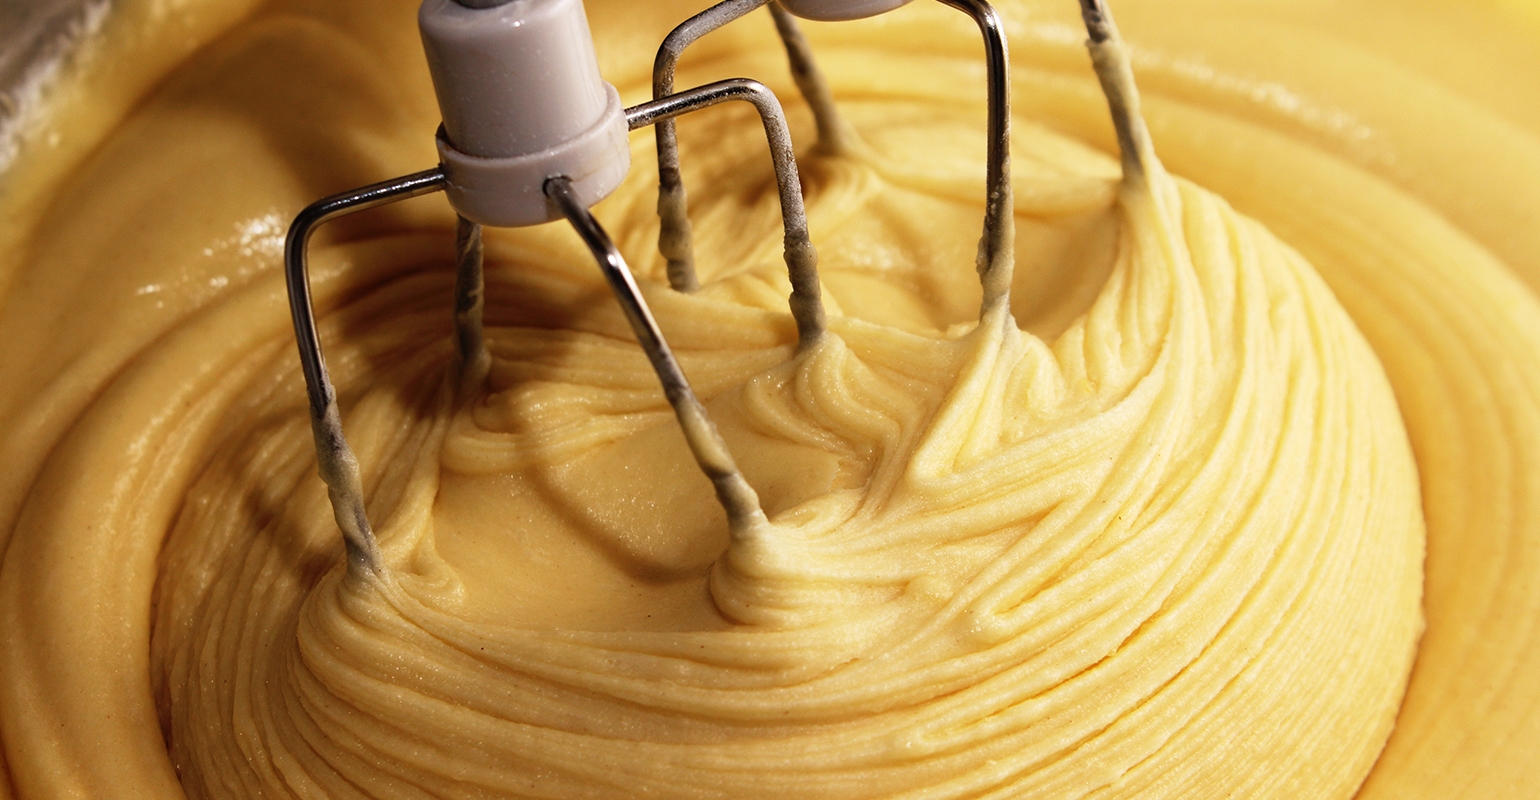 The Meaning of Emulsify in Cooking and Baking